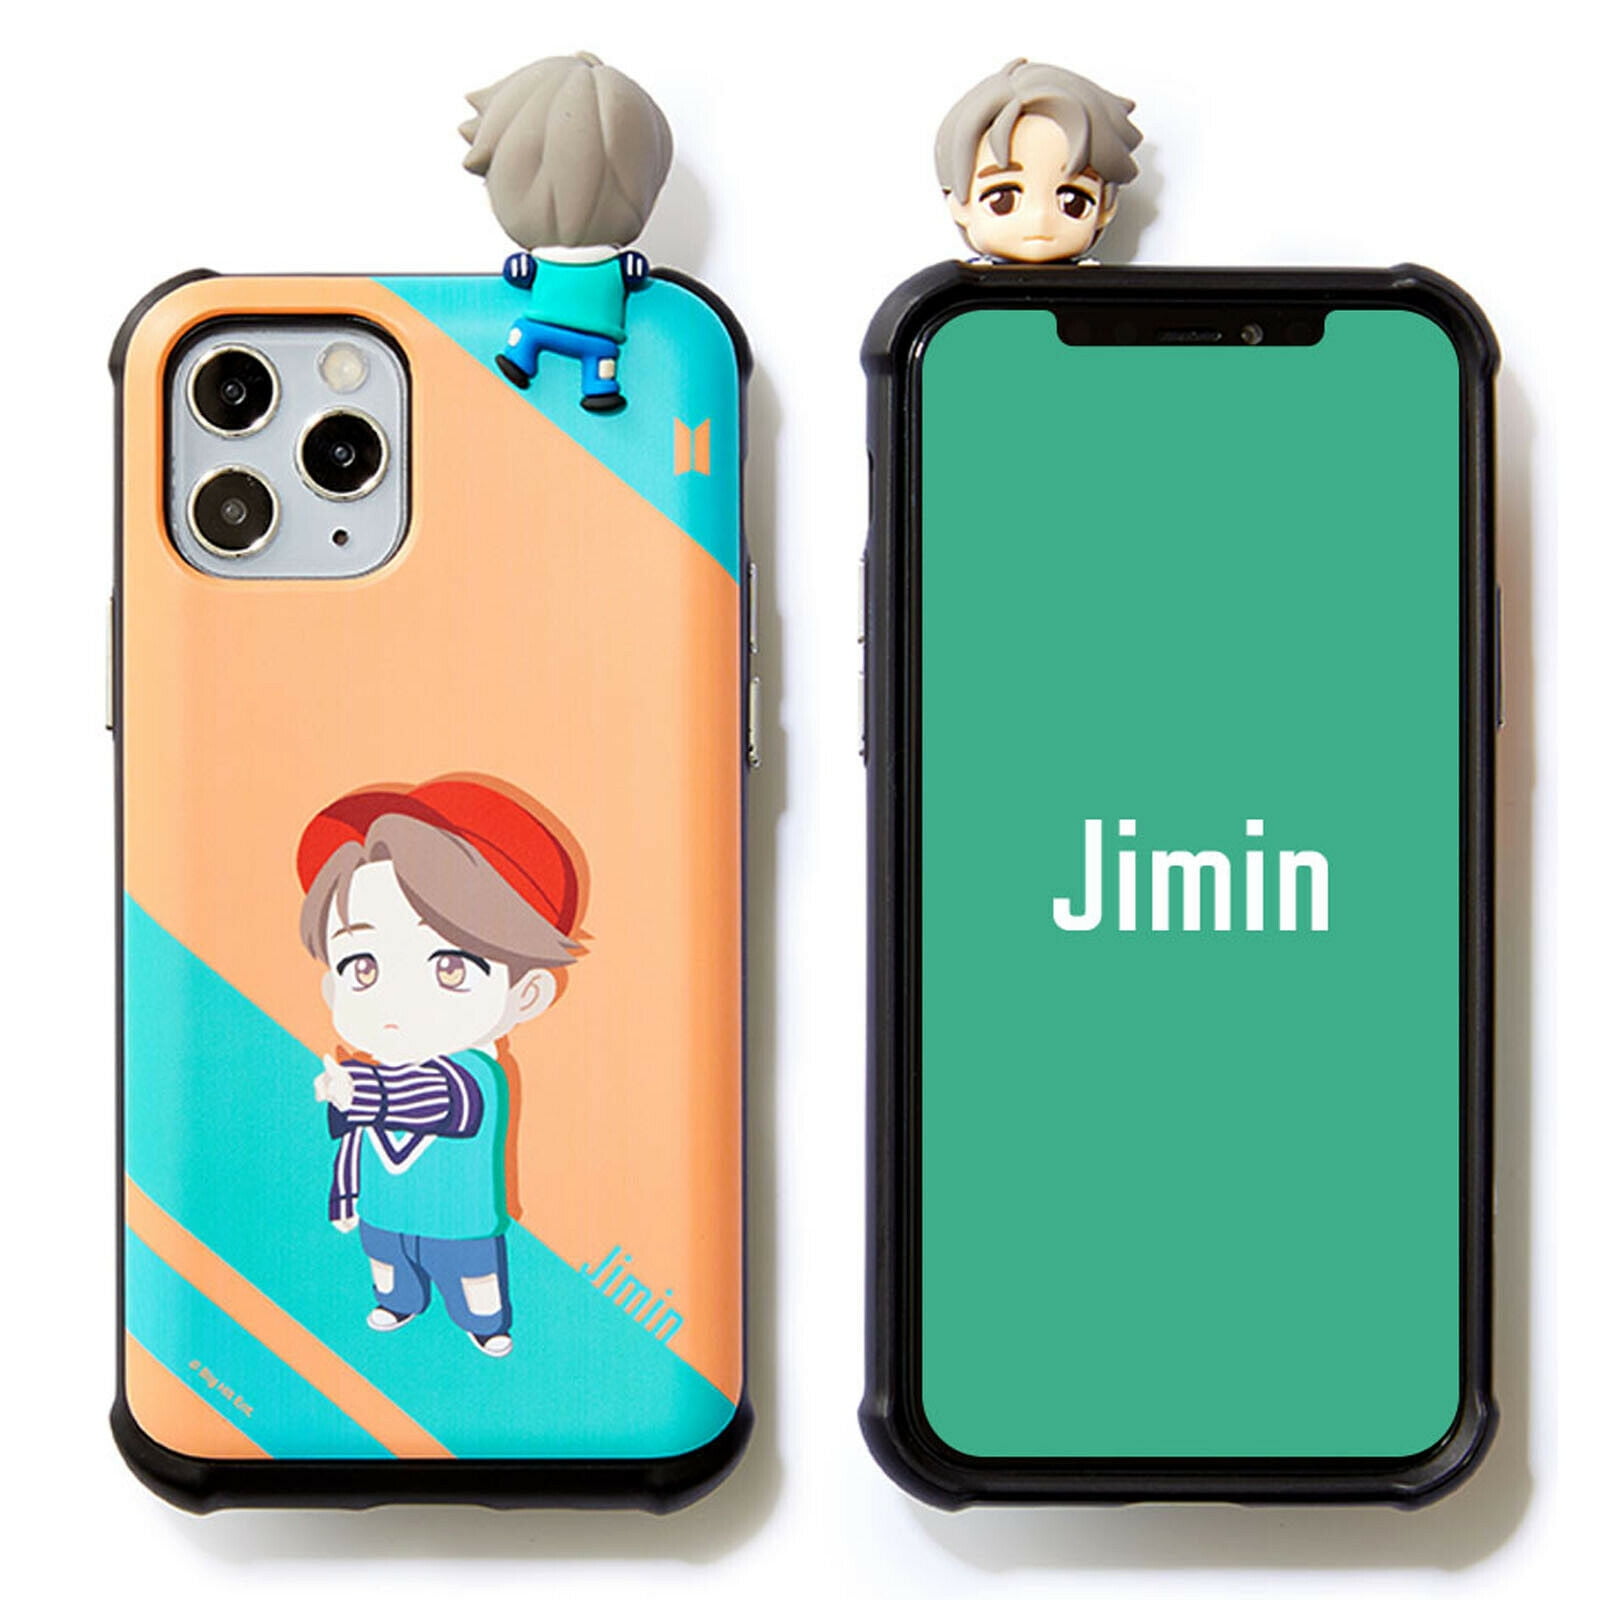 BTS Butter Charm Strap for Silicone Grip Case